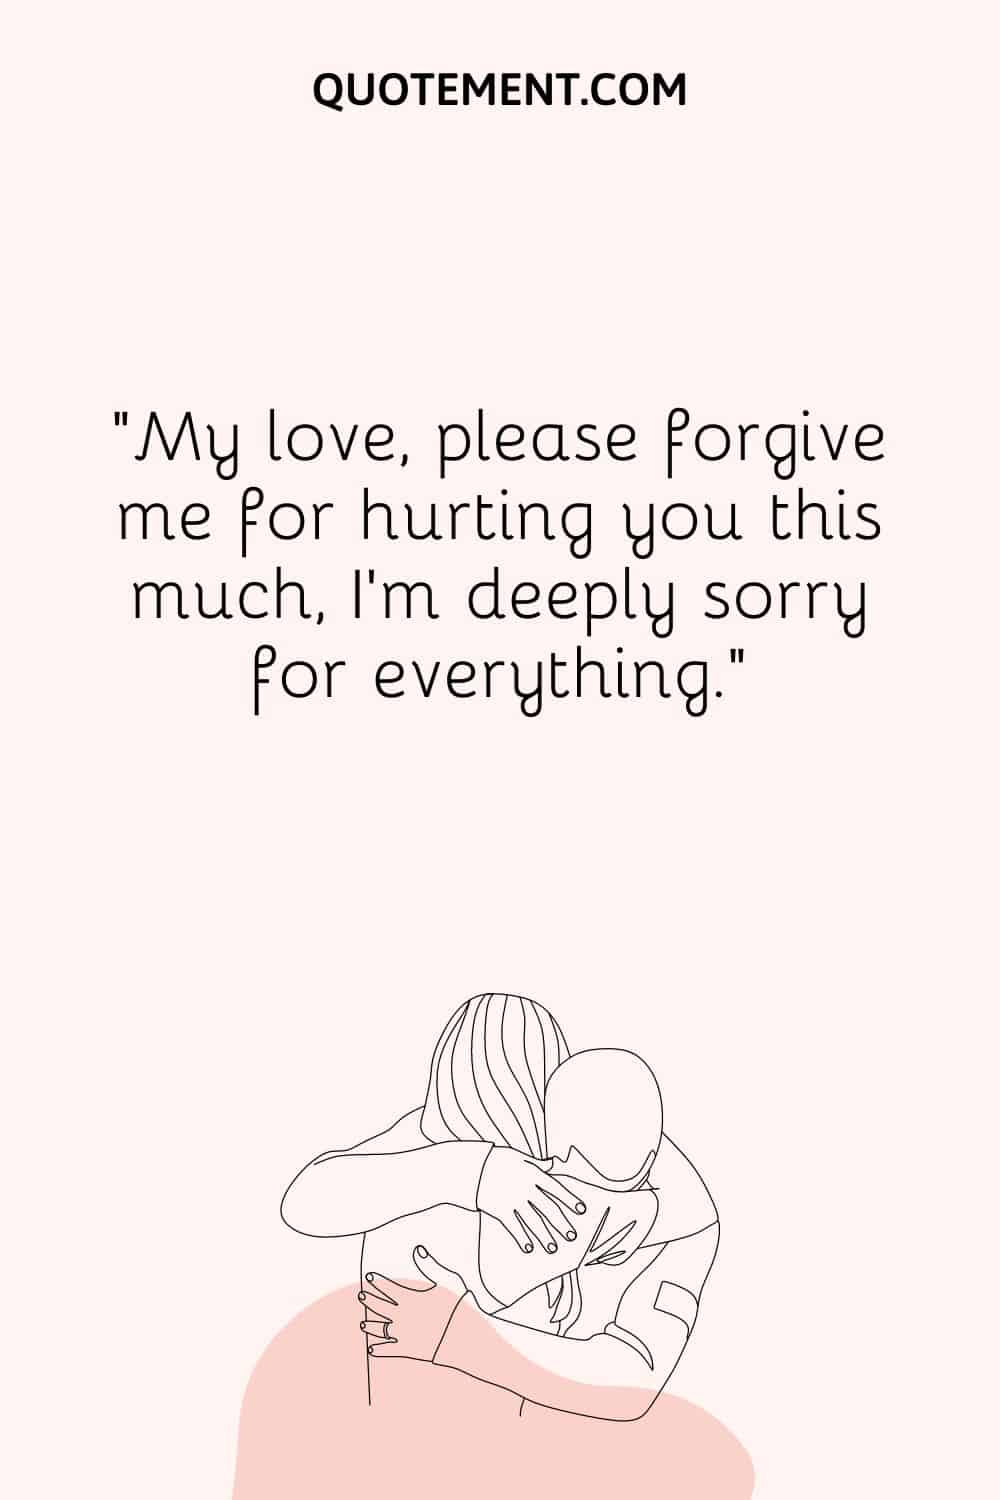 I’m deeply sorry for everything